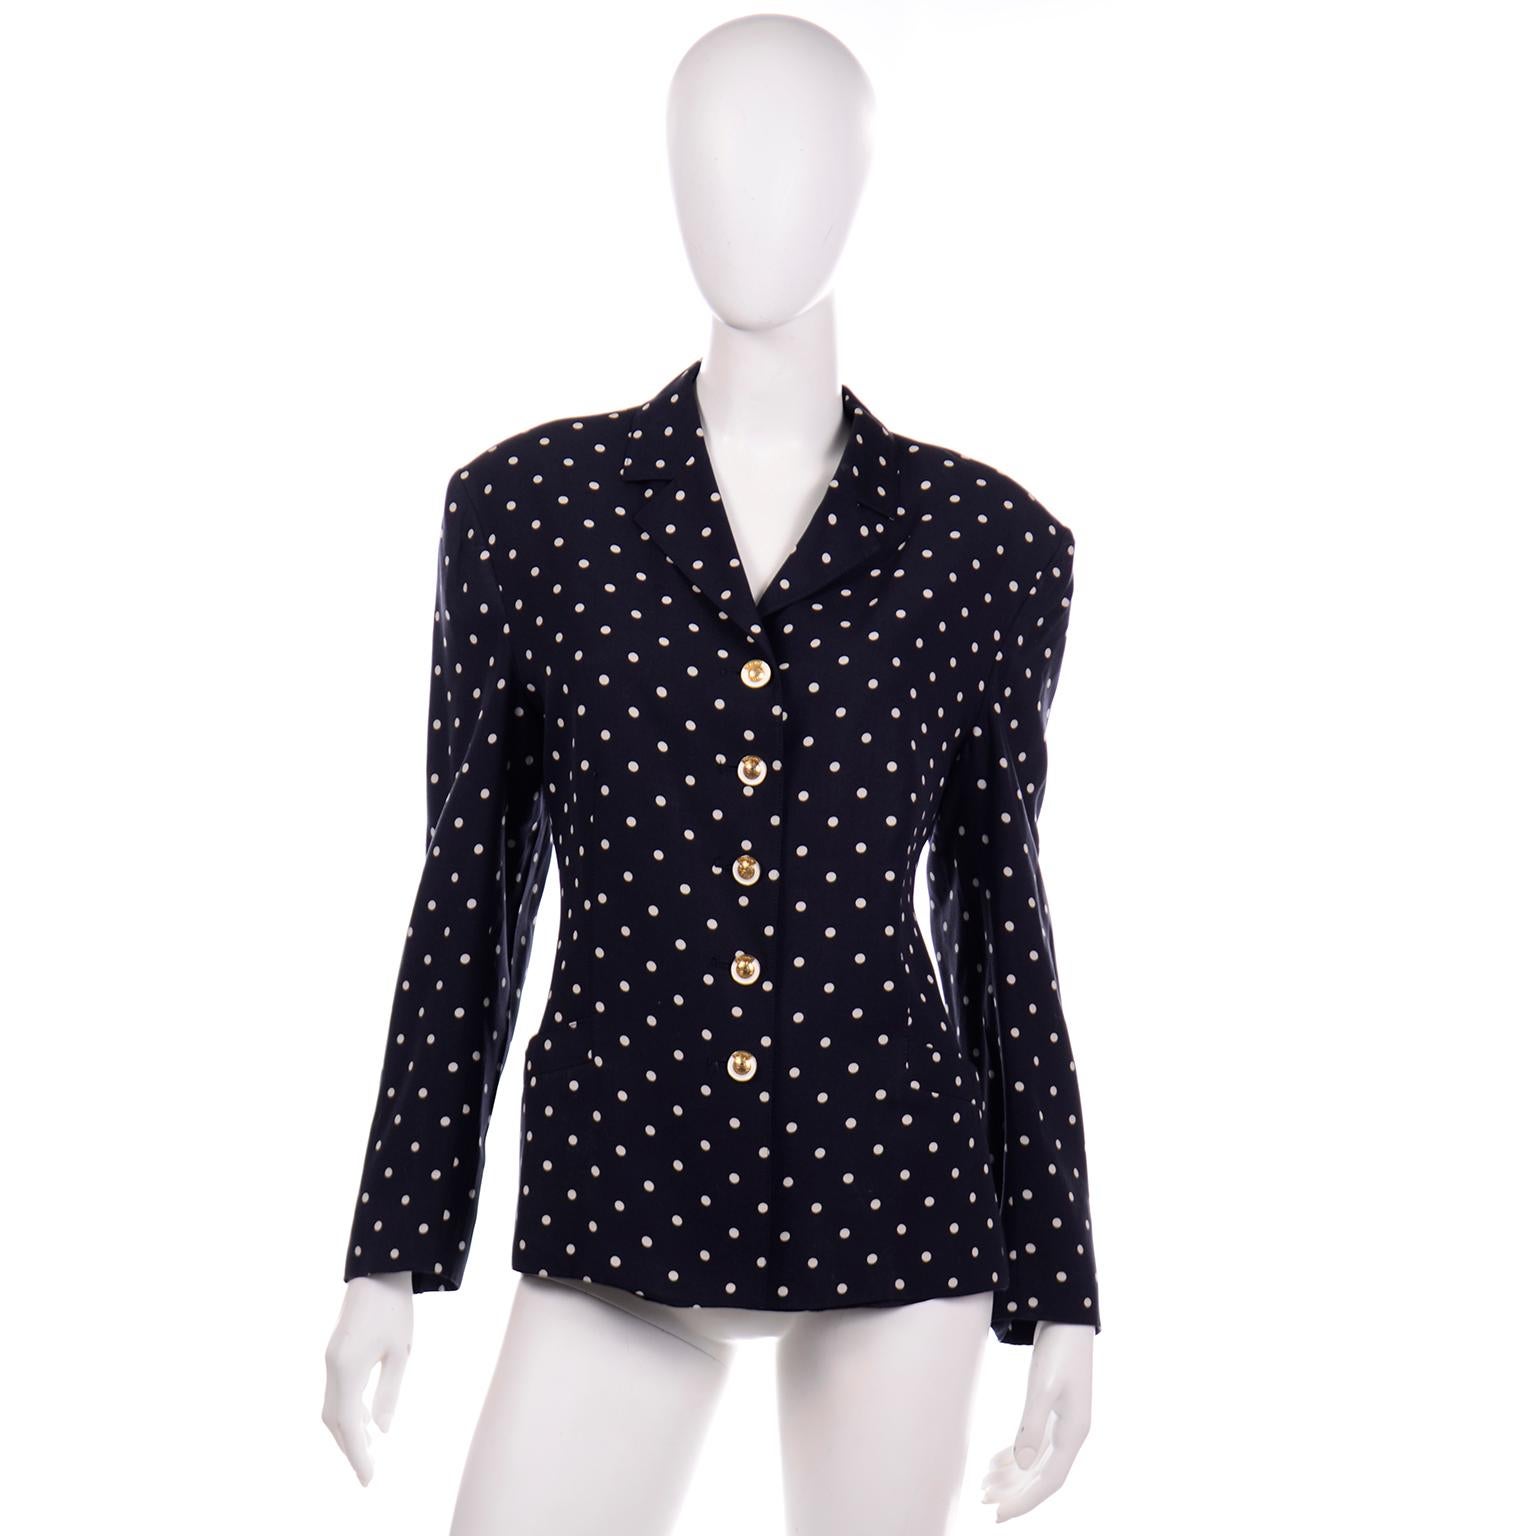 Louis Feraud Vintage Navy Polka Dot Peplum Top Pencil Skirt & Blazer Jacket Suit In Excellent Condition For Sale In Portland, OR